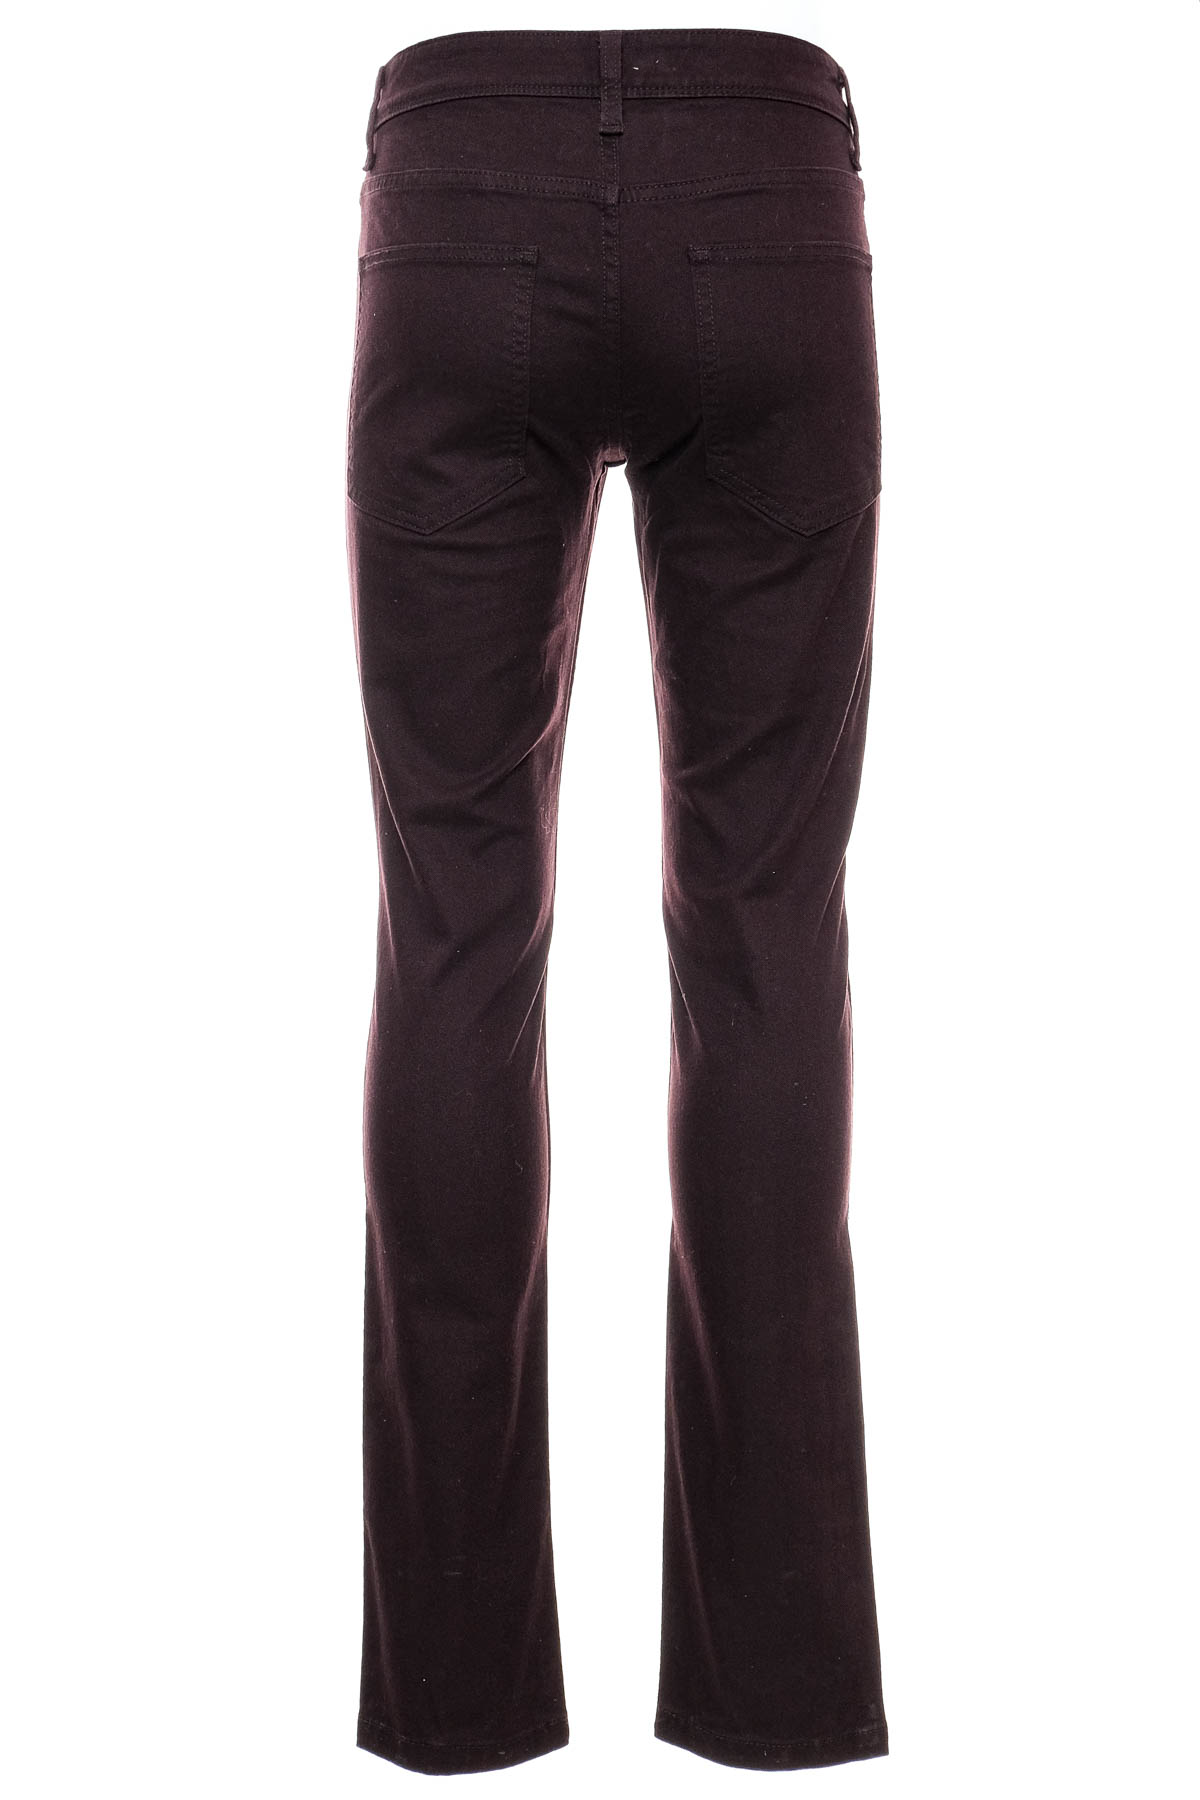 Men's trousers - Angelo Litrico - 1